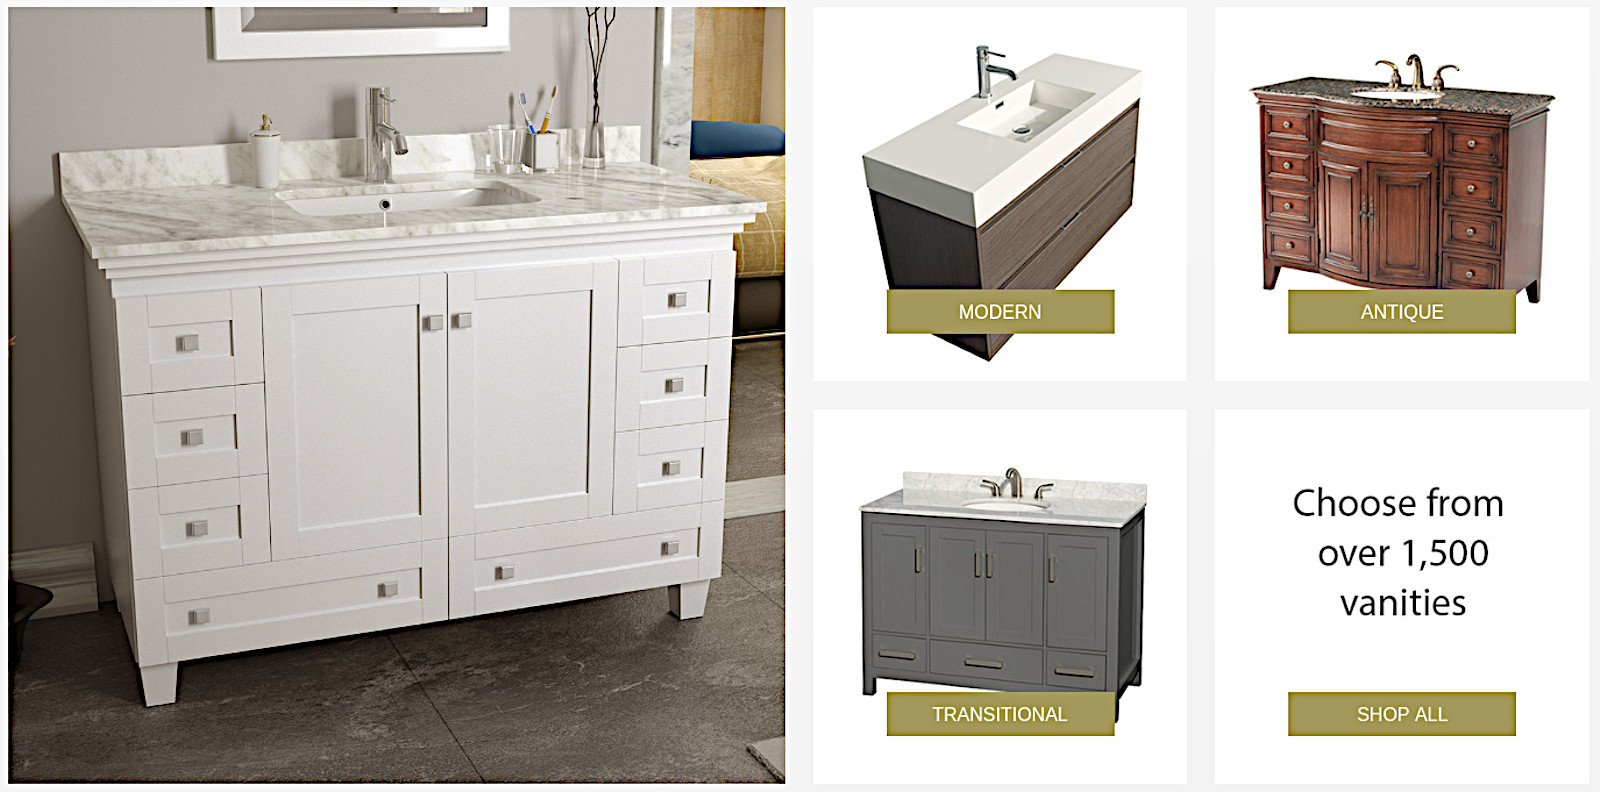 Competitive Price modern antique transitional vanities